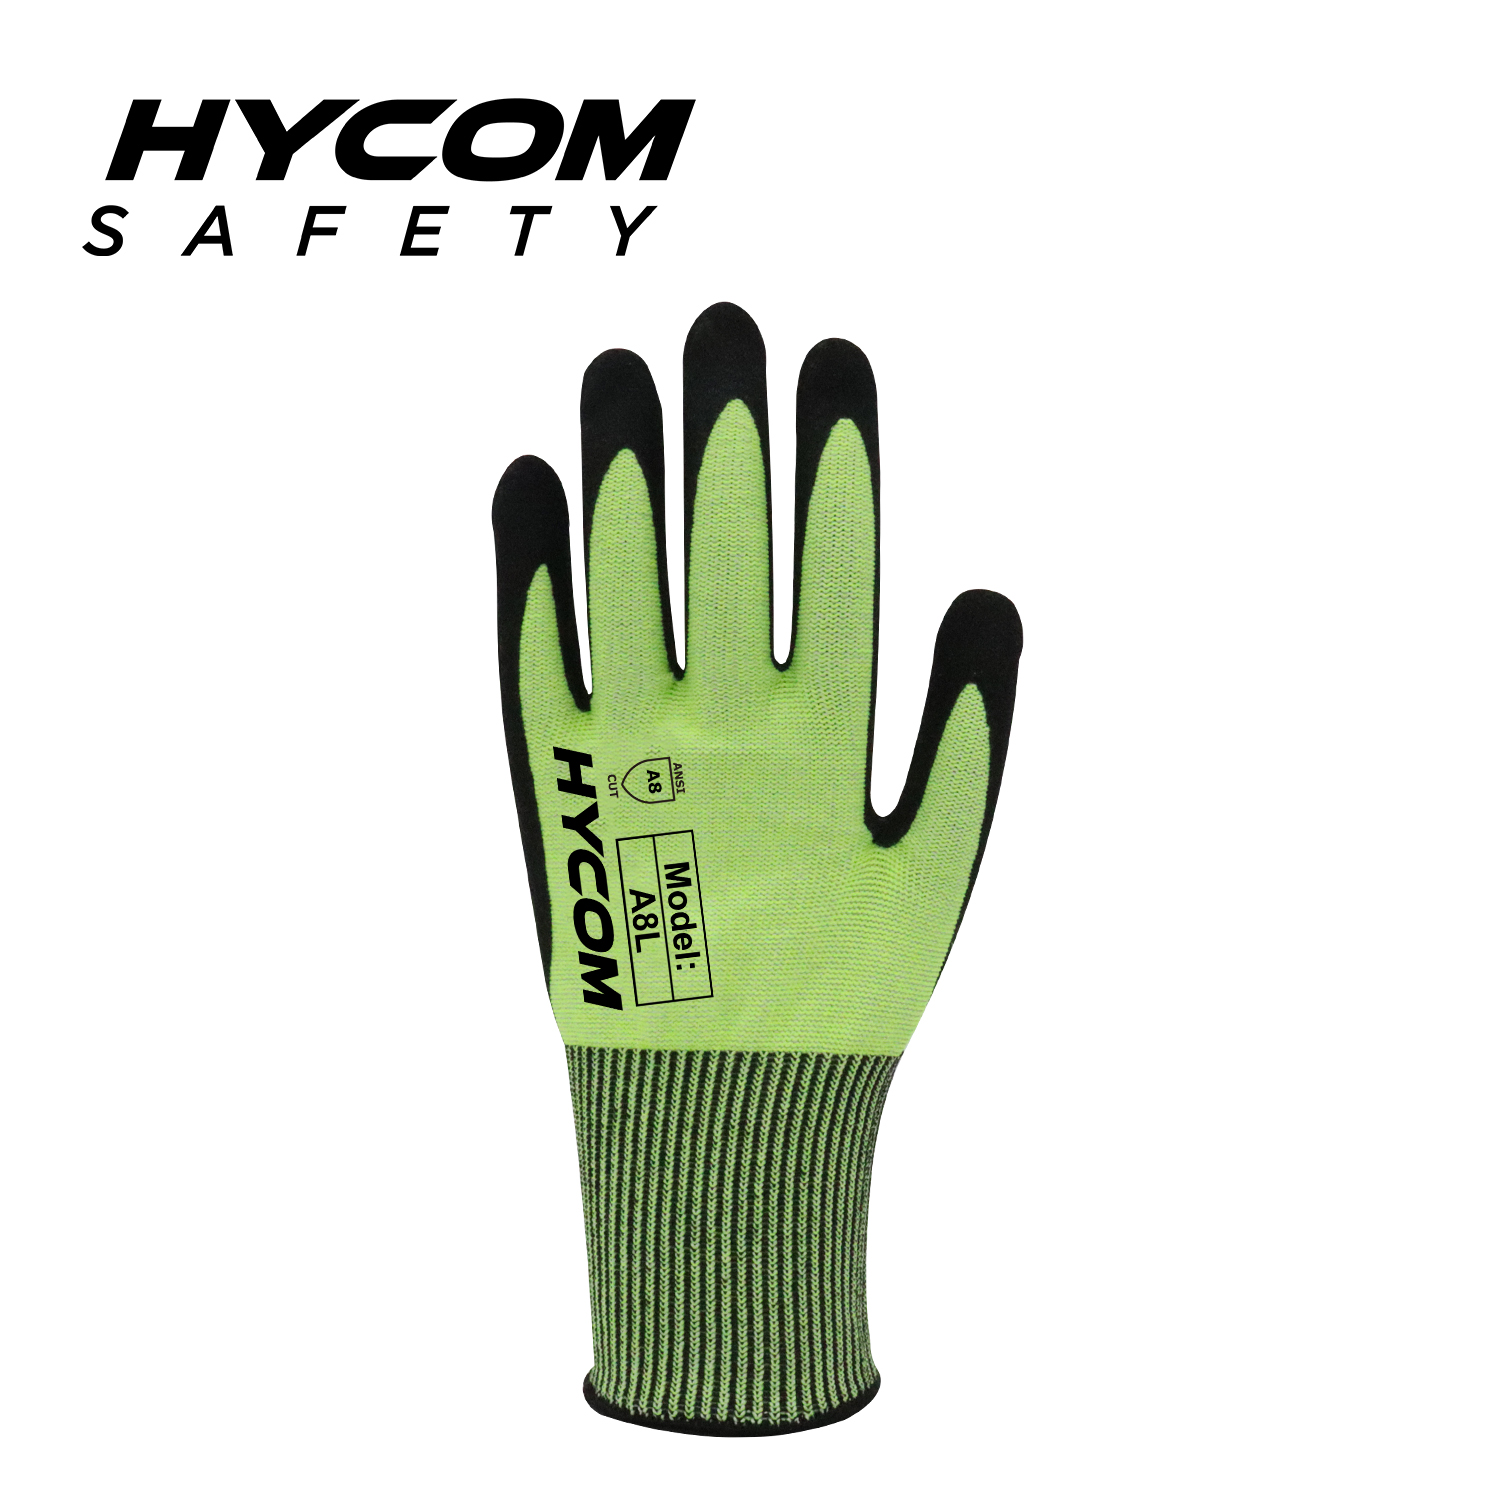 HYCOM 13G ANSI 8 Cut Resistant Glove with Palm Nitrile Coating High Cut Grade PPE Gloves for Industry